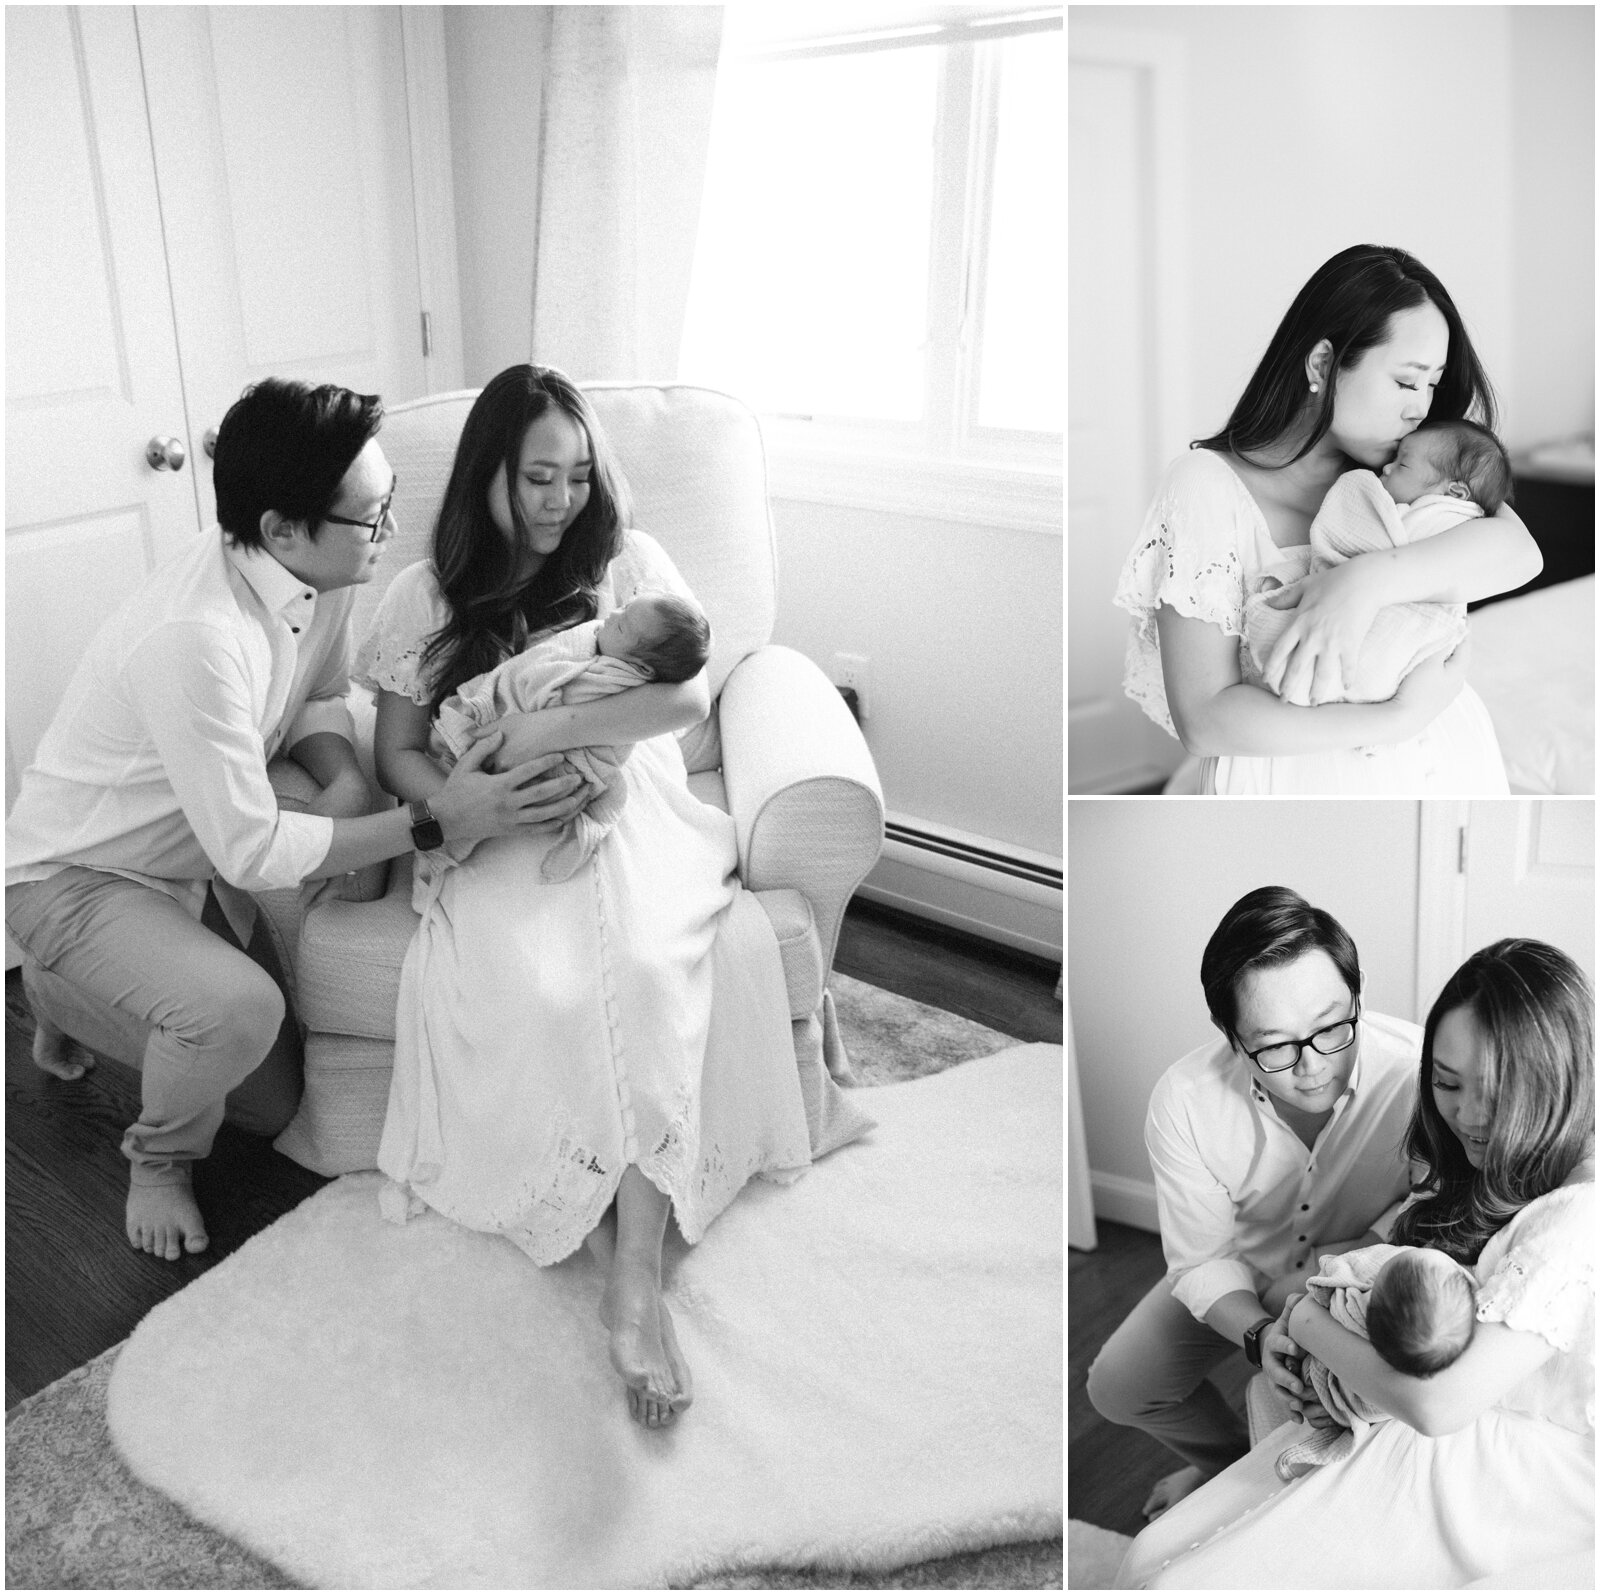  Family photos at home with newborn boy. Mom, Dad, Baby. NKB Photo, New Jersey.  